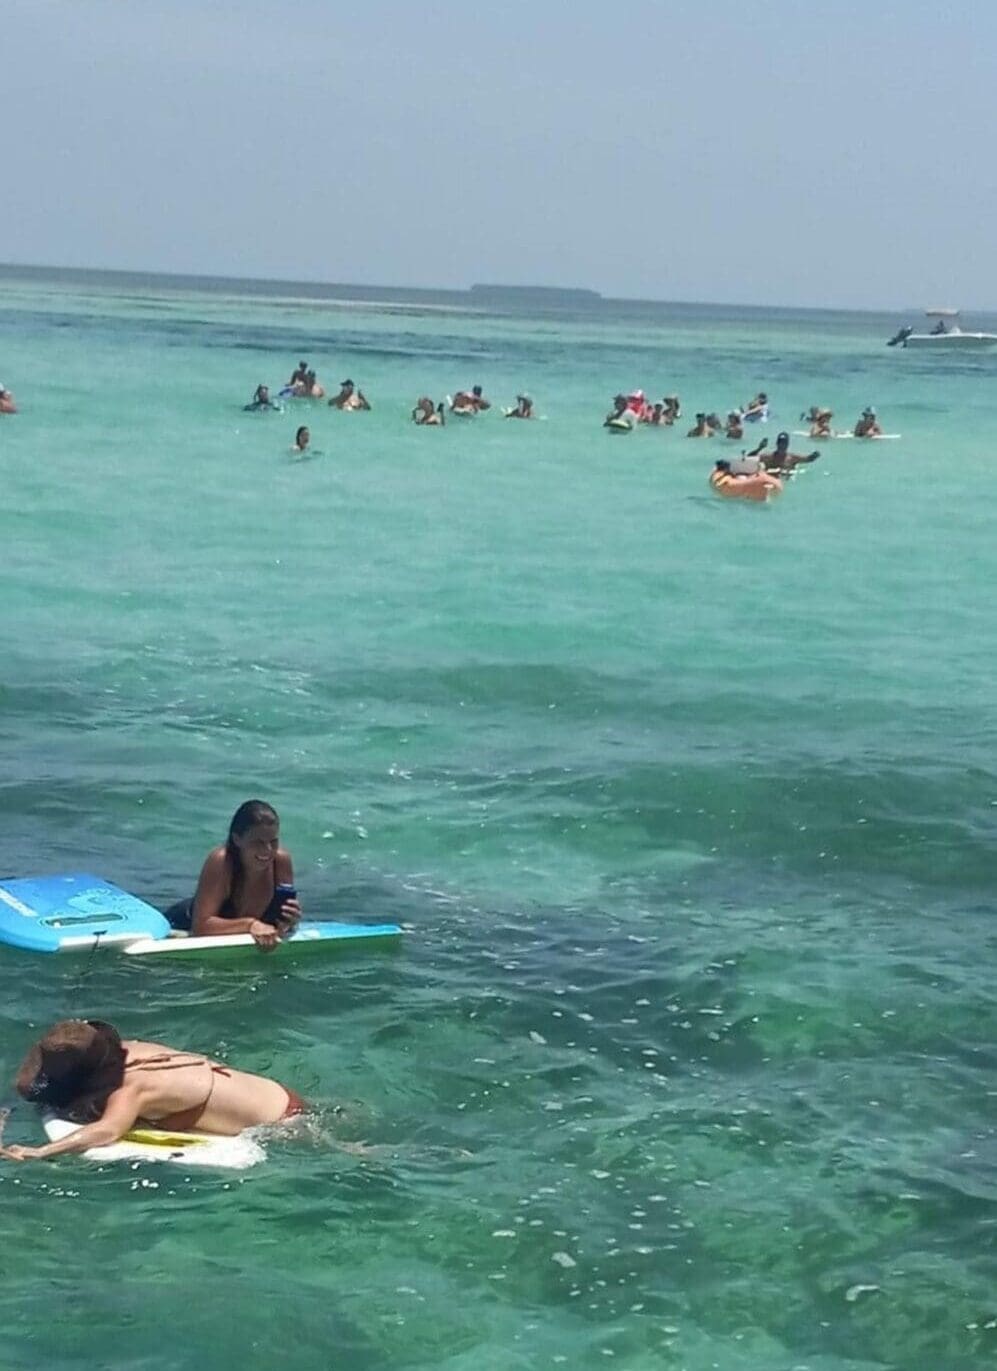 A group of people swimming in the ocean.